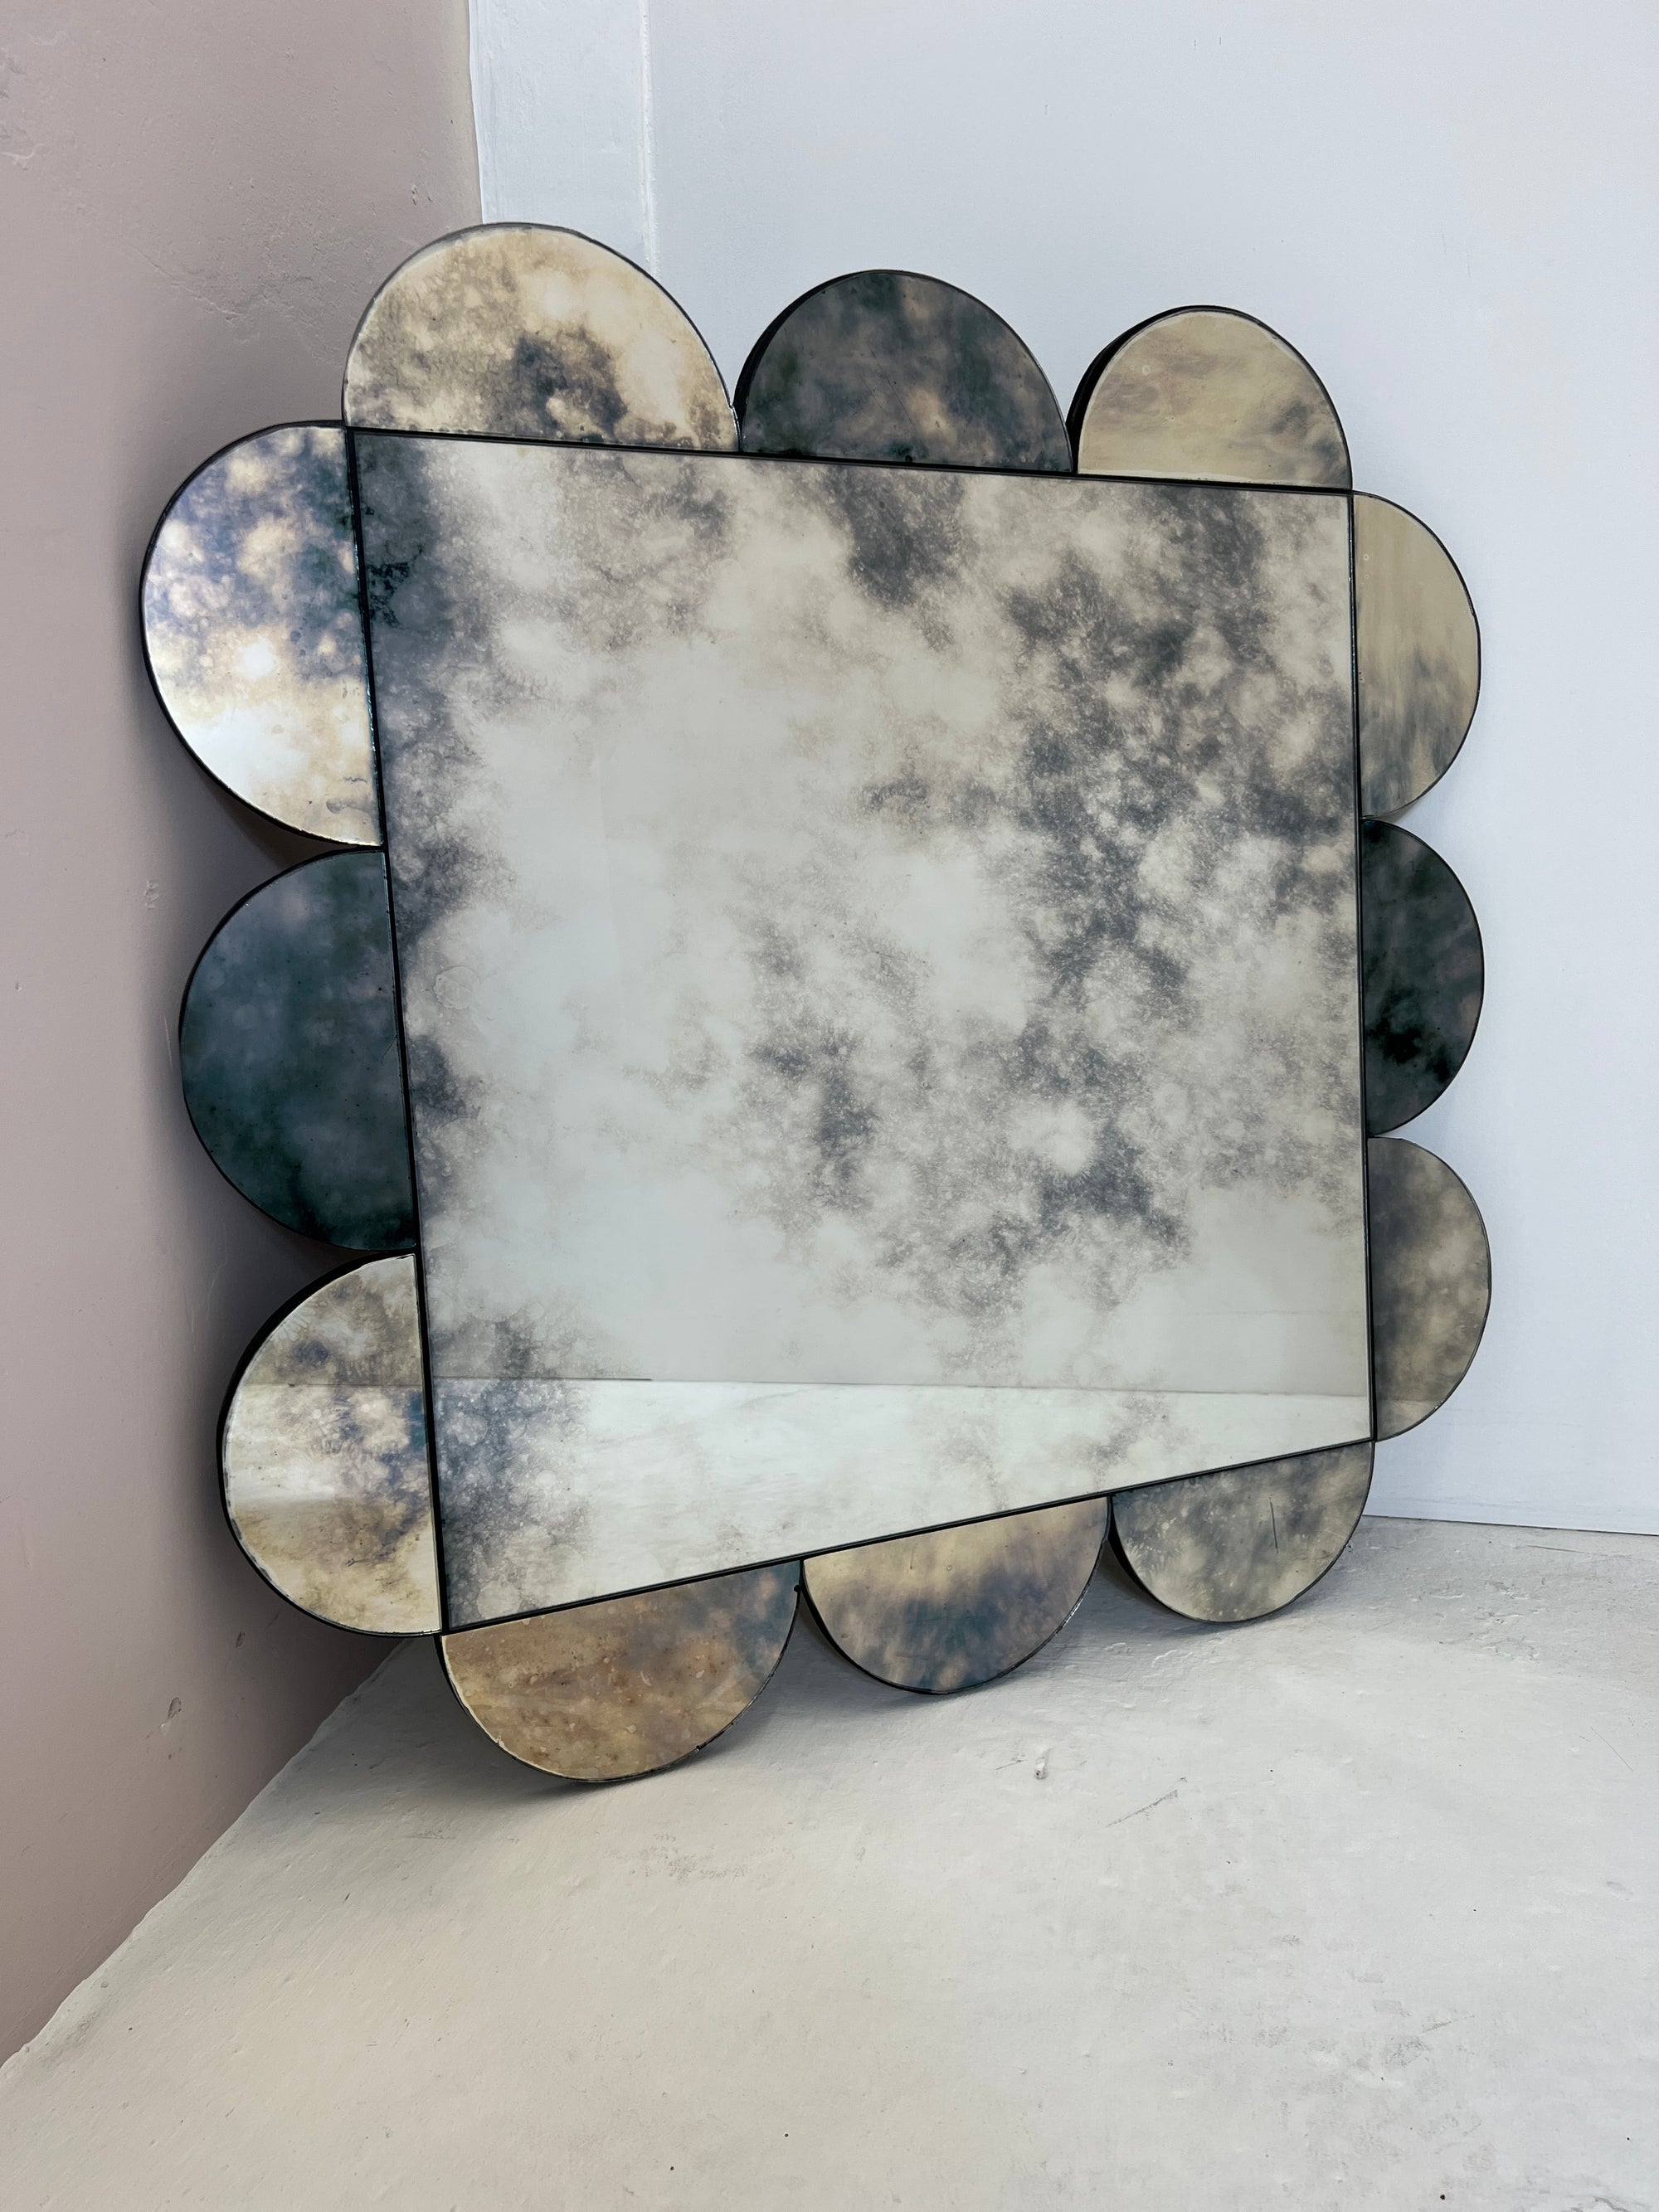 Clouded antiqued mirror - 810 x 820mm